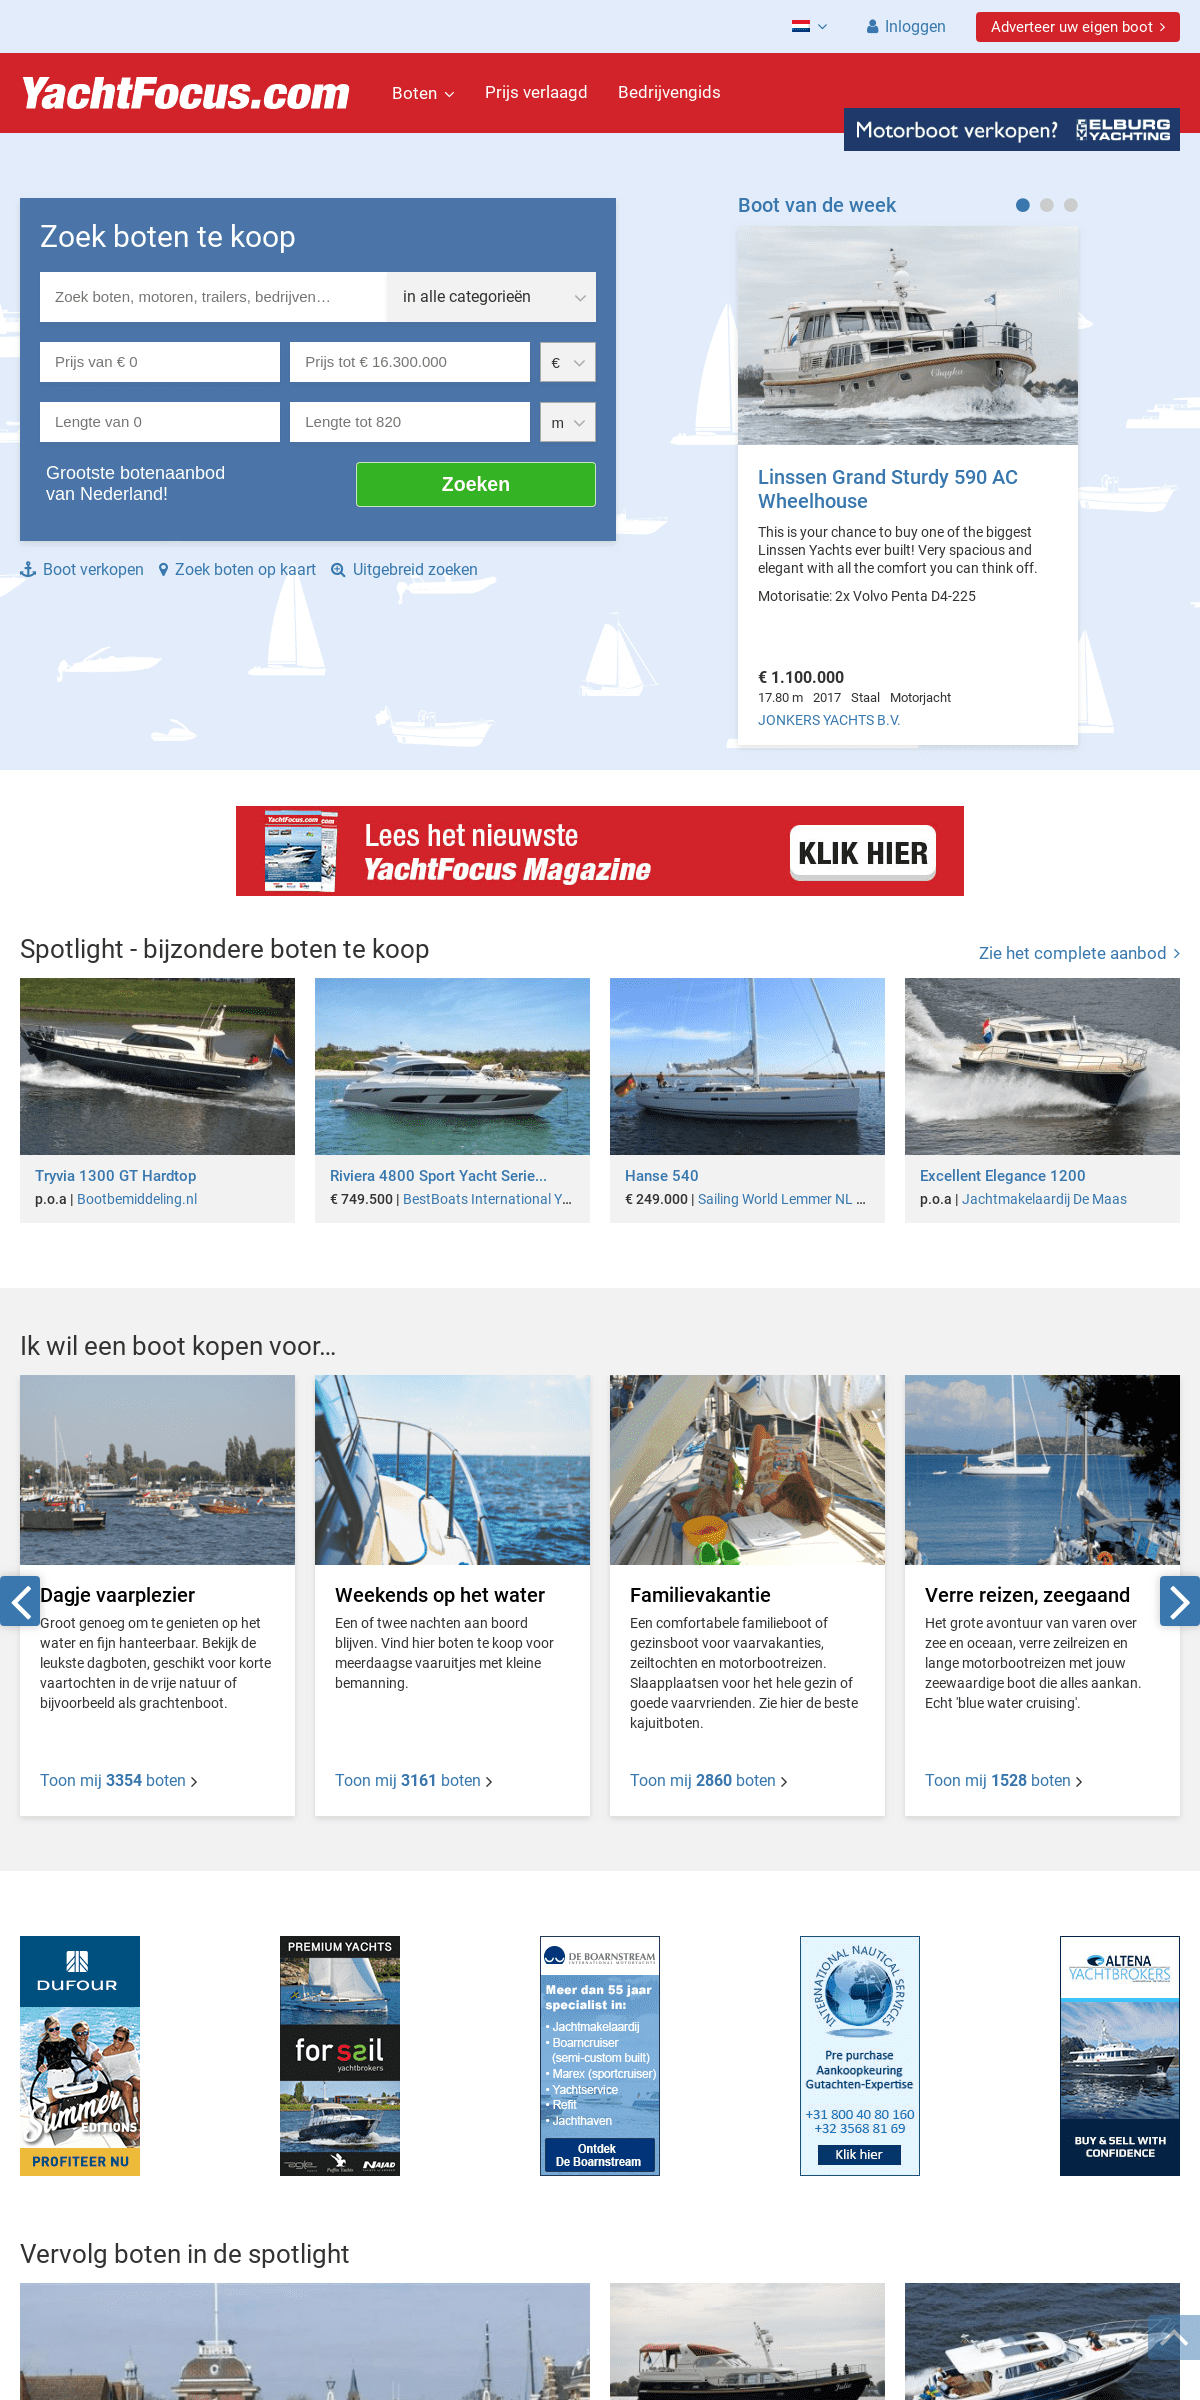 A complete backup of yachtfocus.com